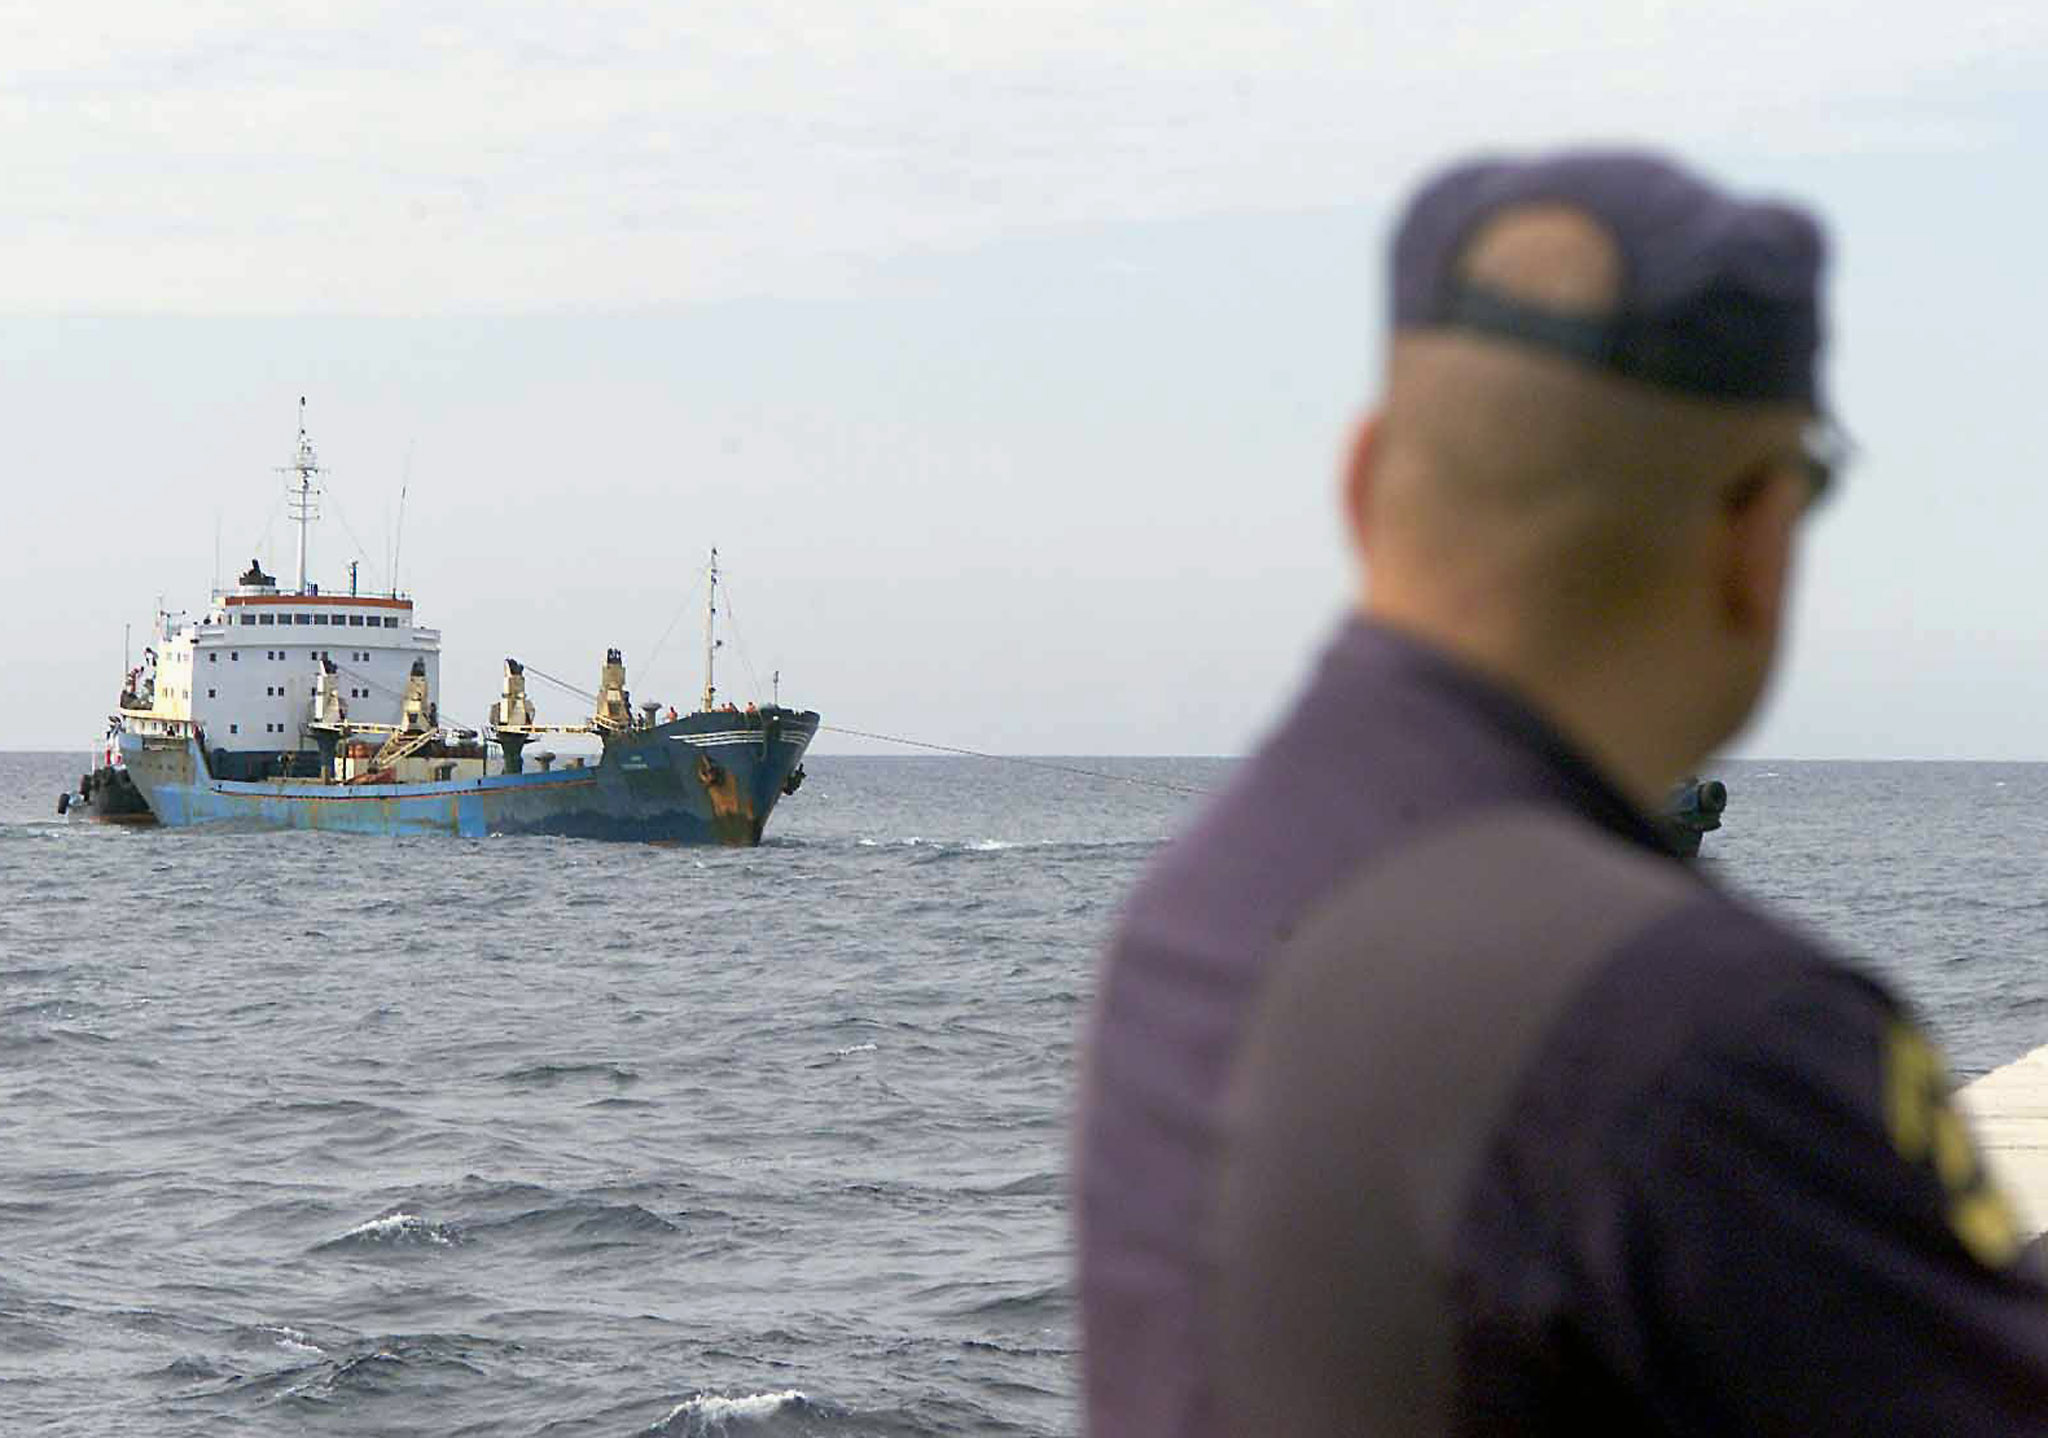 A Spanish policeman watches a vessel arrive in the port of Santa Cruzde Tenerife in the Canary Islands August 30, 2001 during aninternational police operation involving Spain, the U.S. and Canada.Fourteen people were arrested and two boats seized off the coast ofFrench Guiana carrying about five tonnes of cocaine. Spain is a majorEuropean entry point for drugs and contraband coming from North Africaand Latin America. REUTERS/Alex RosaDB